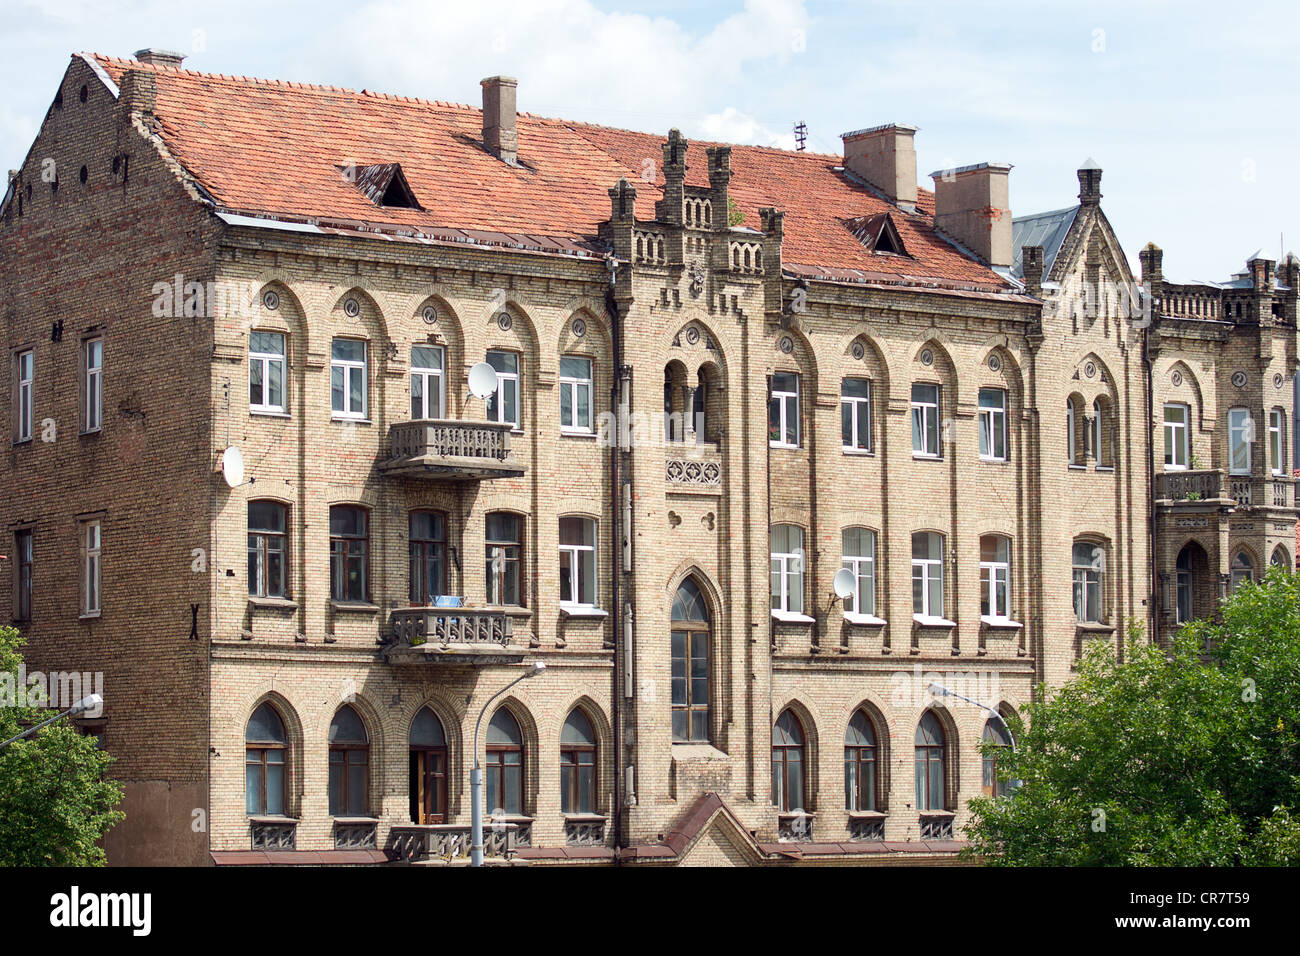 The facade of the old multi-story brick house in Vilnius, Lithuania Stock Photo